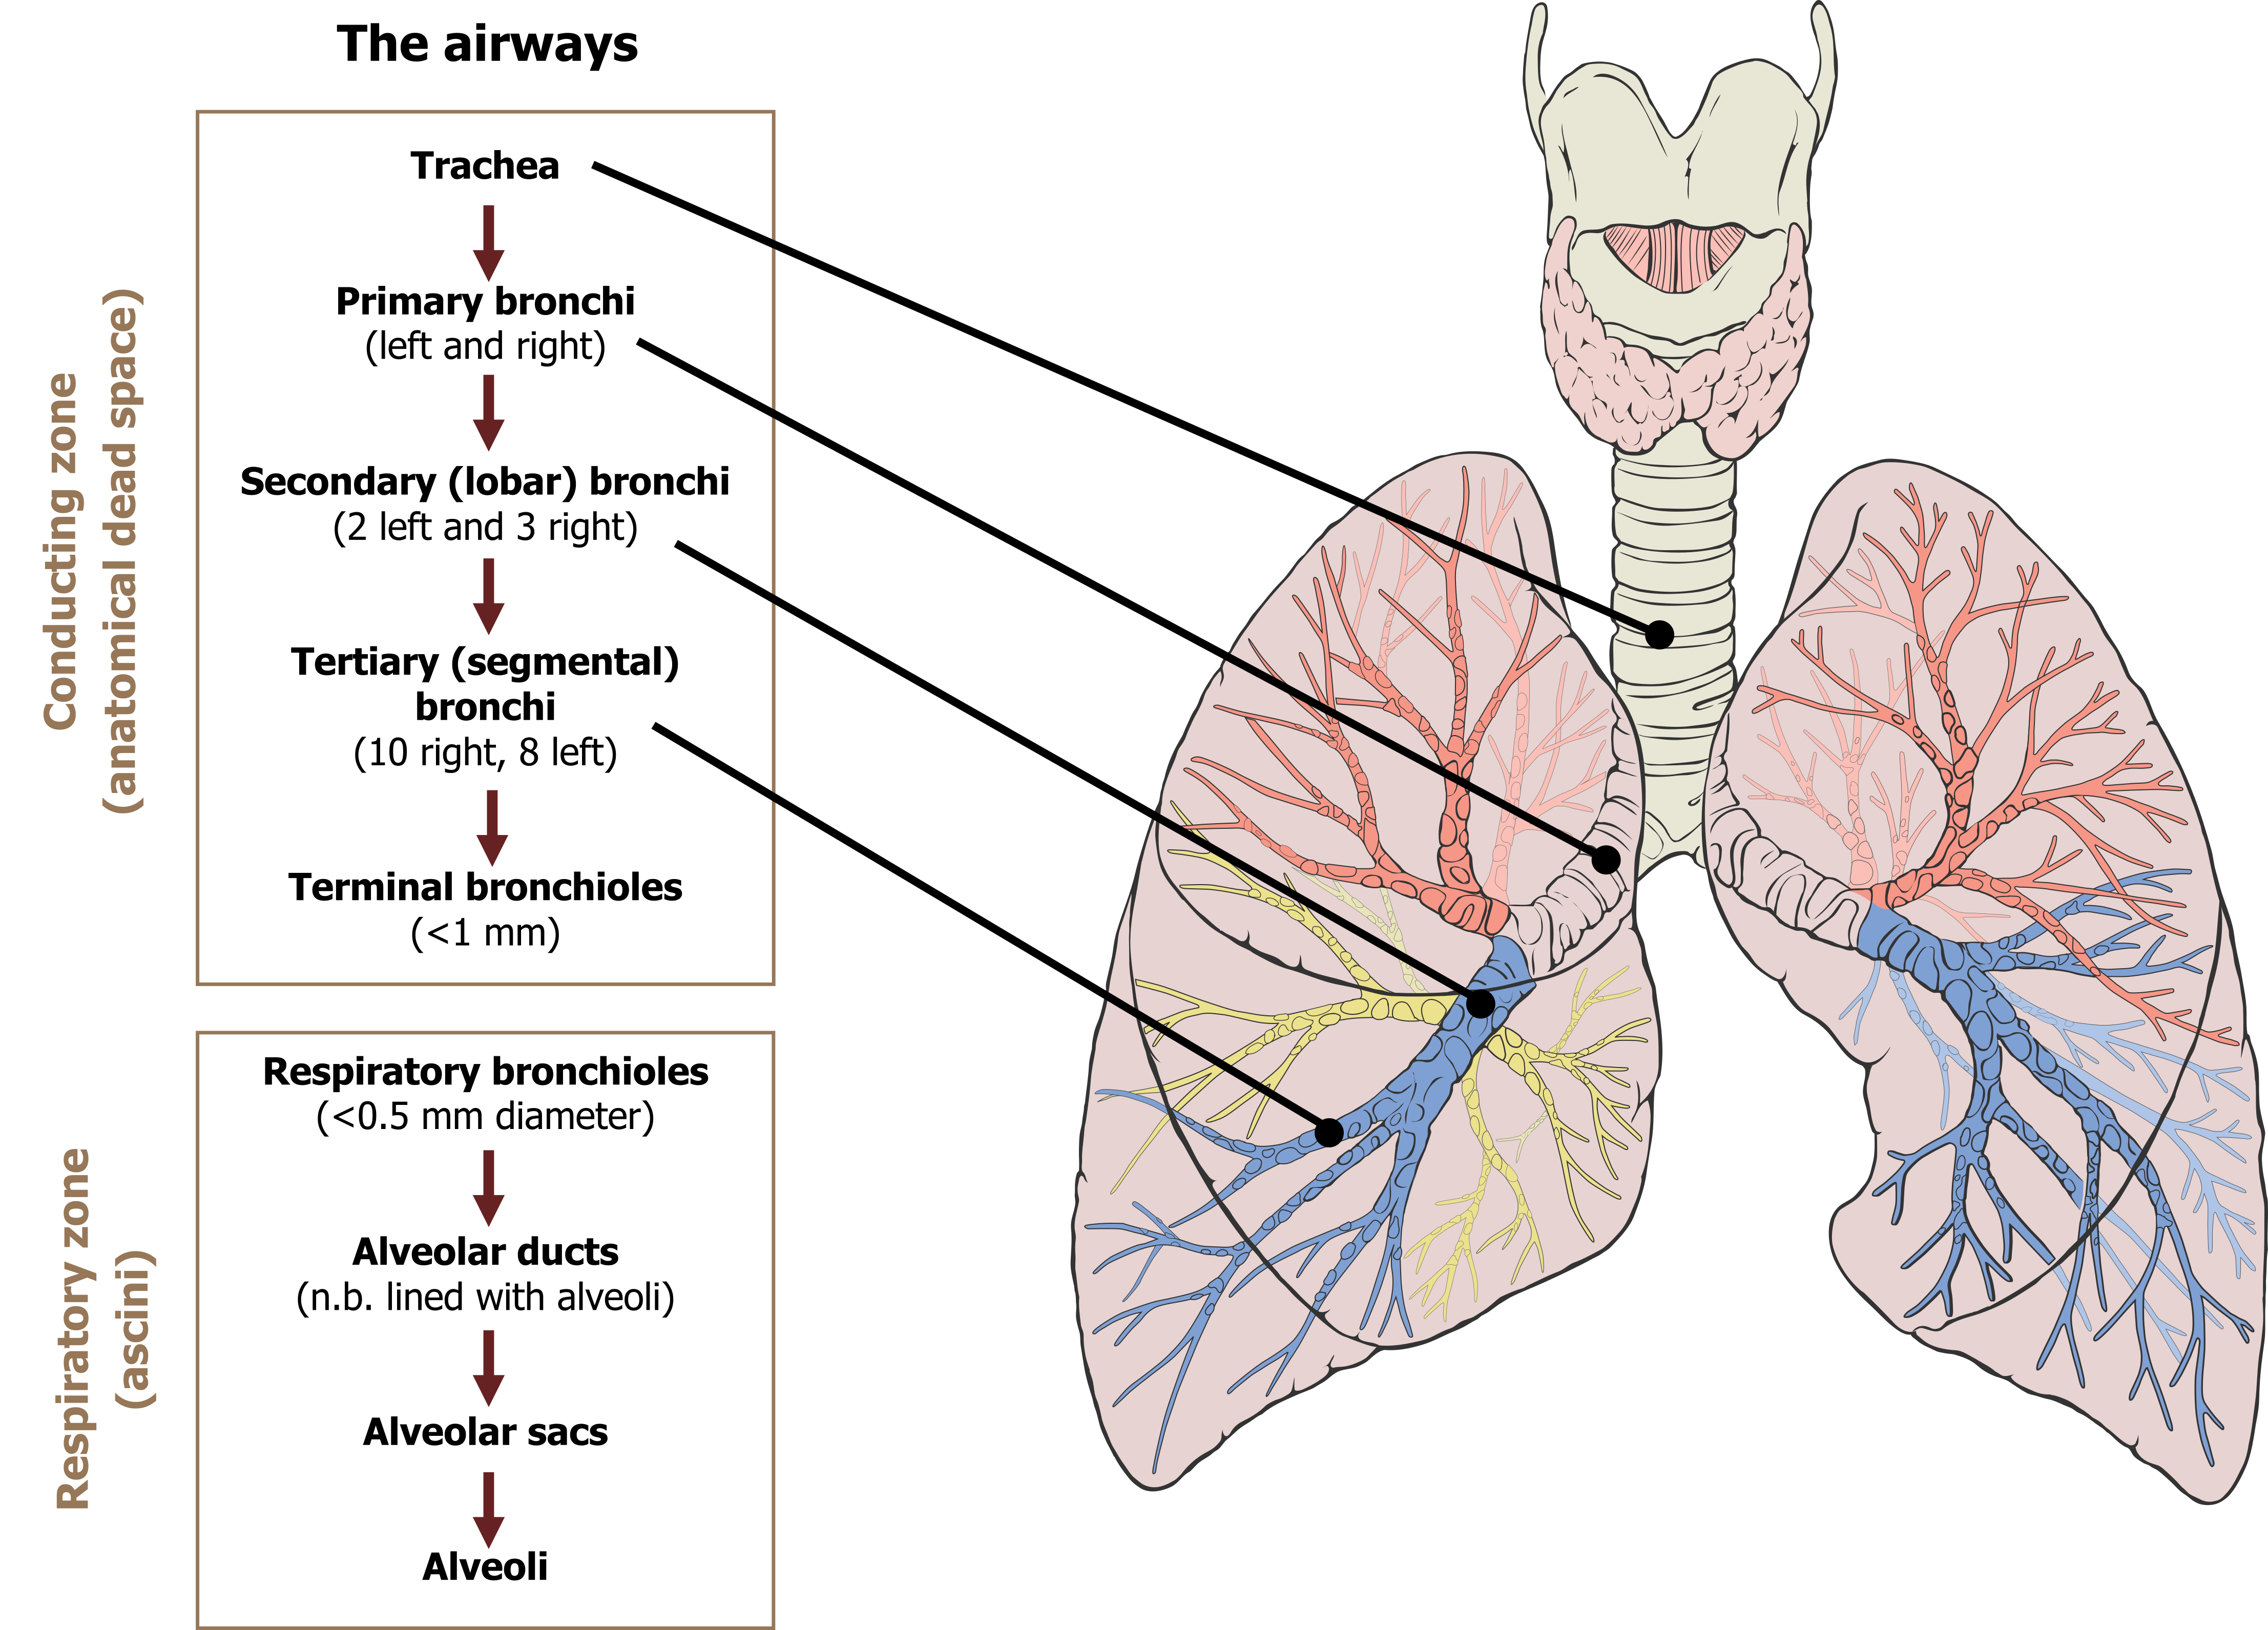 The figure contains a single column table that is divided into two rows. The upper row is labelled the conducting zone includes the airways descending from the trachea, to the primary bronchi, to secondary or lobar bronchi to the tertiary or segmental bronchi to the terminal bronchi. An illustration of the major airways is to the right of the table and arrows from the airways in the conducting zone point to their positions in the bronchial tree. The lower row of the table is labelled the respiratory zone and contains the airways that lead to the terminal alveoli, from the respiratory bronchioles to the alveolar ducts, to the alveolar sacs and ending at the alveoli.